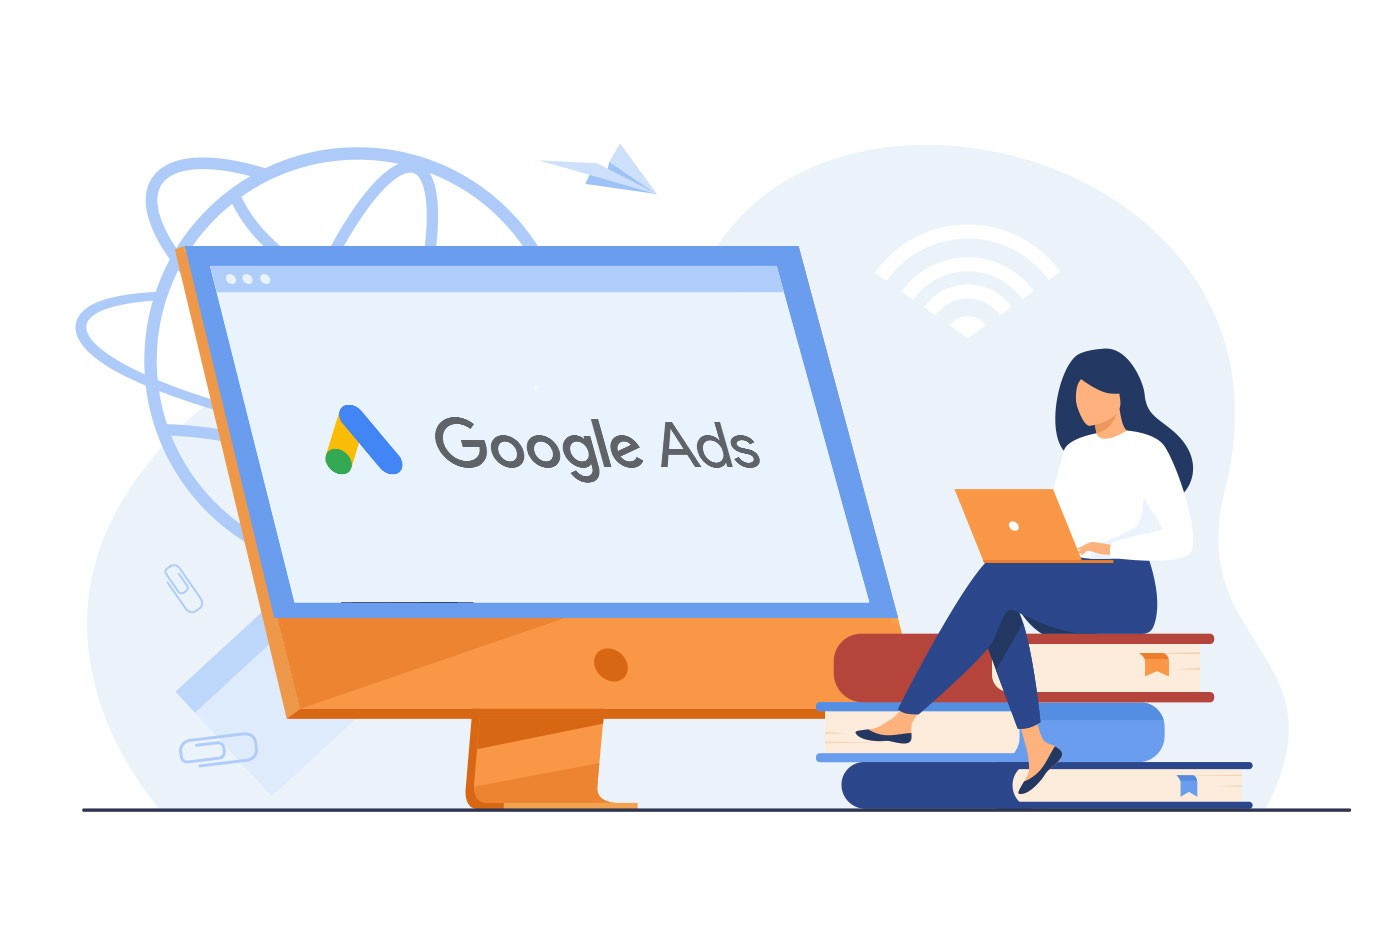 How To Set Up a Google Ads Campaign